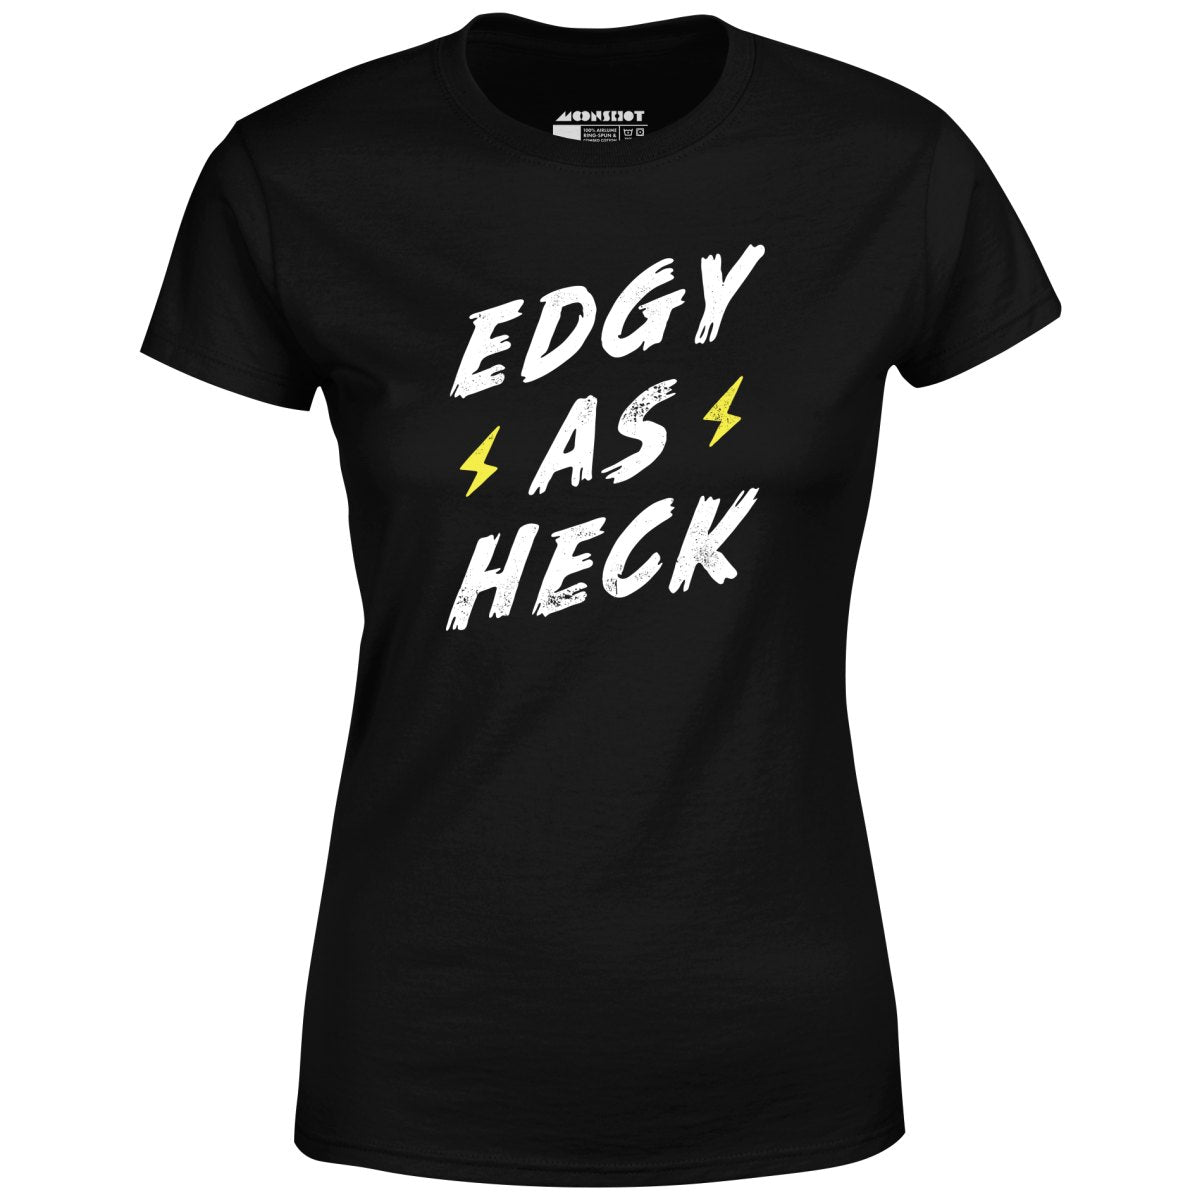 Edgy as Heck - Women's T-Shirt